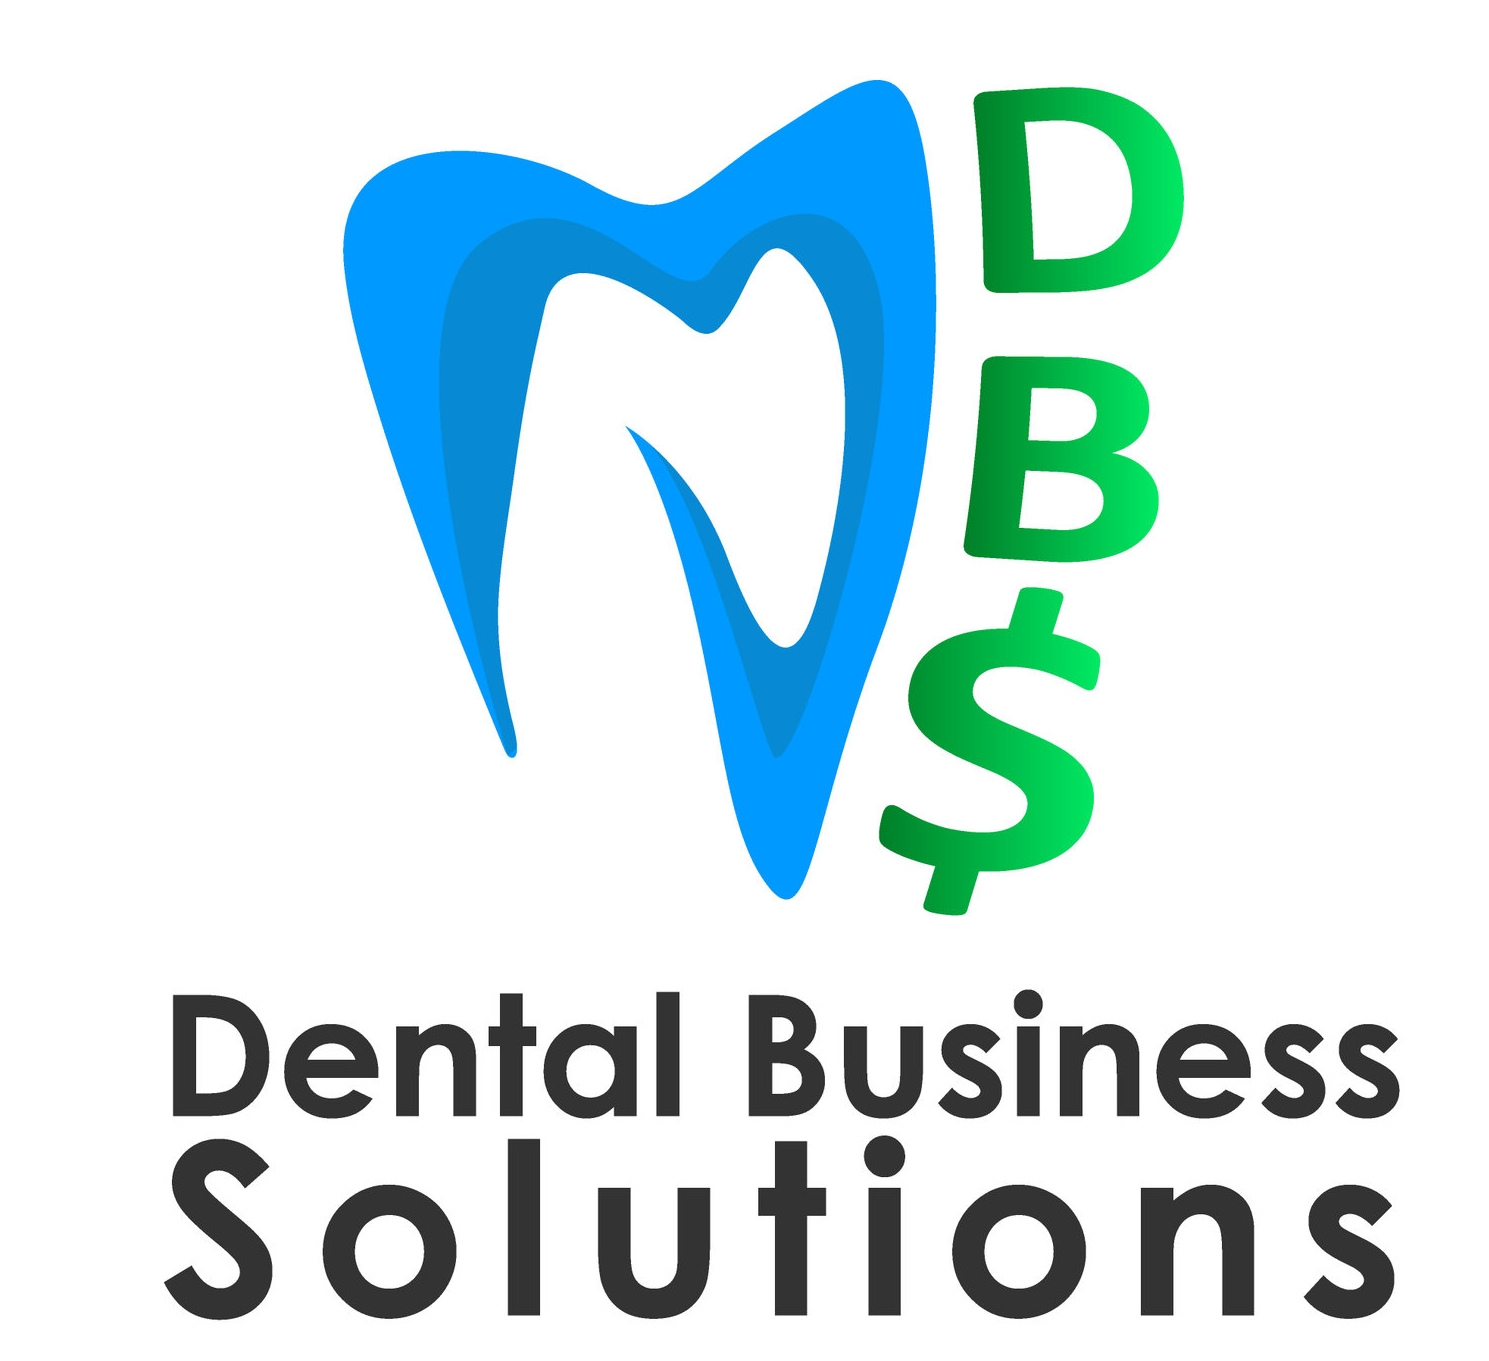 Dental Business Solutions